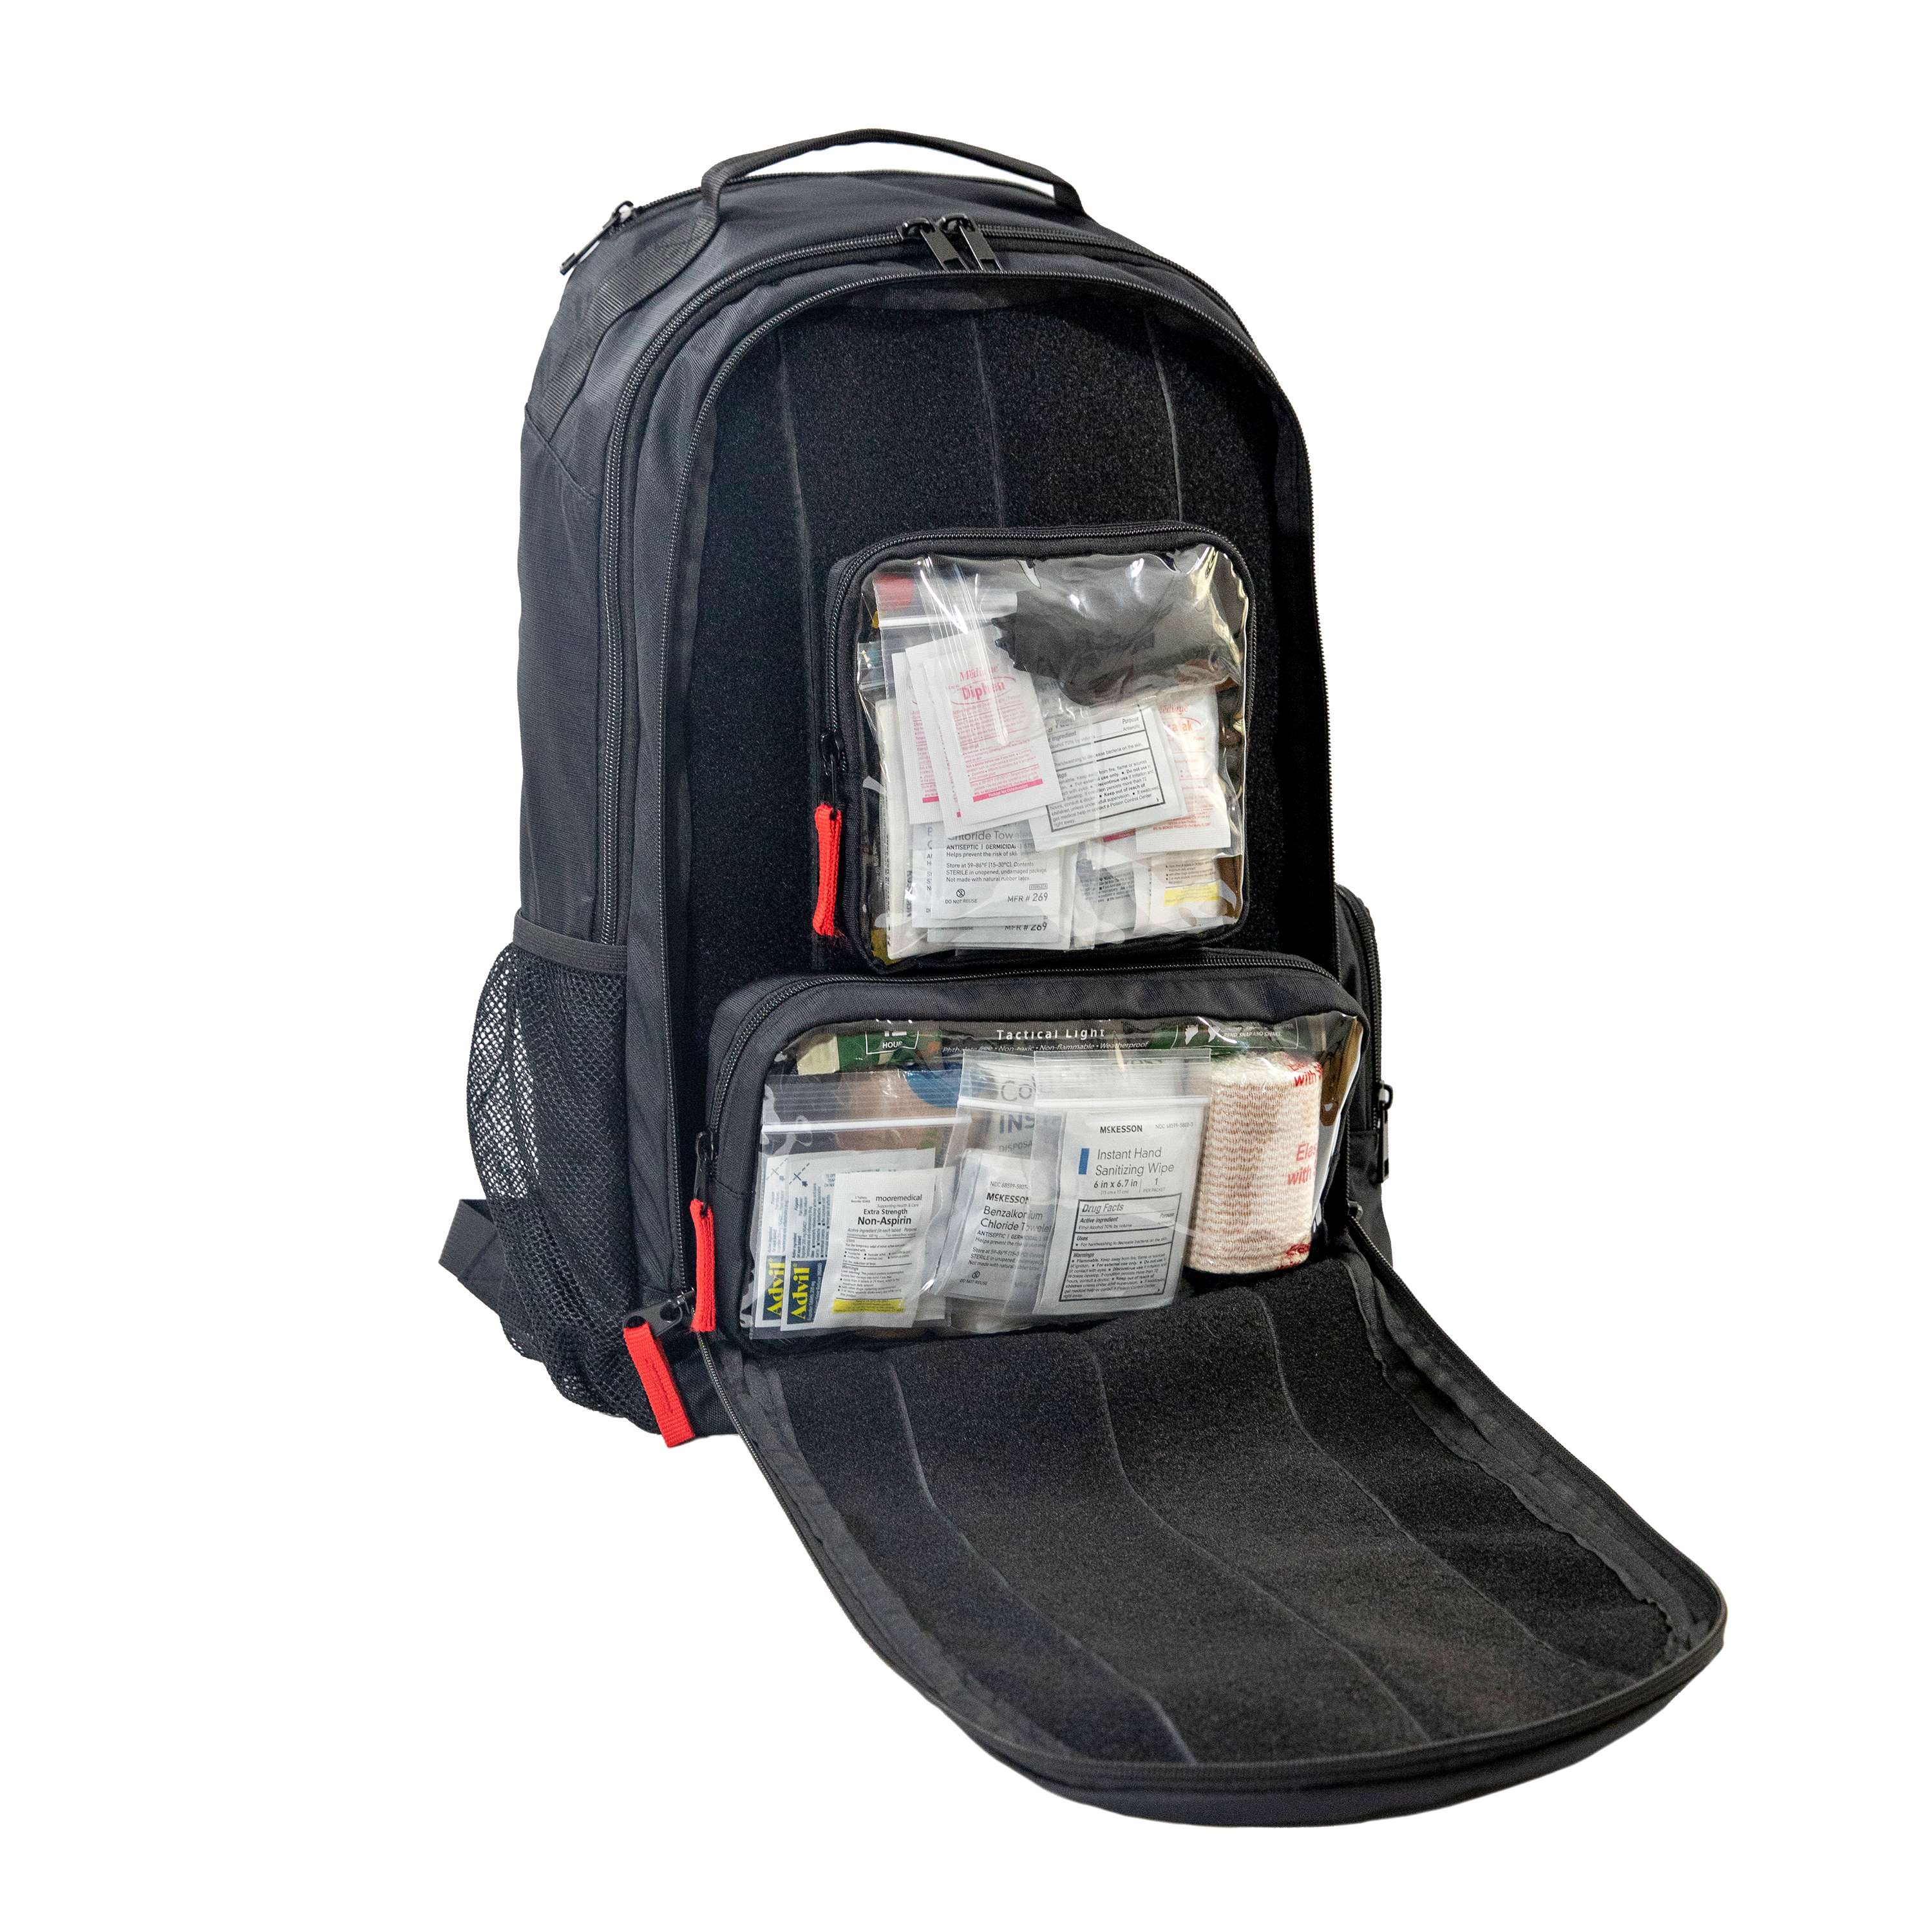 Base first aid kit backpack open